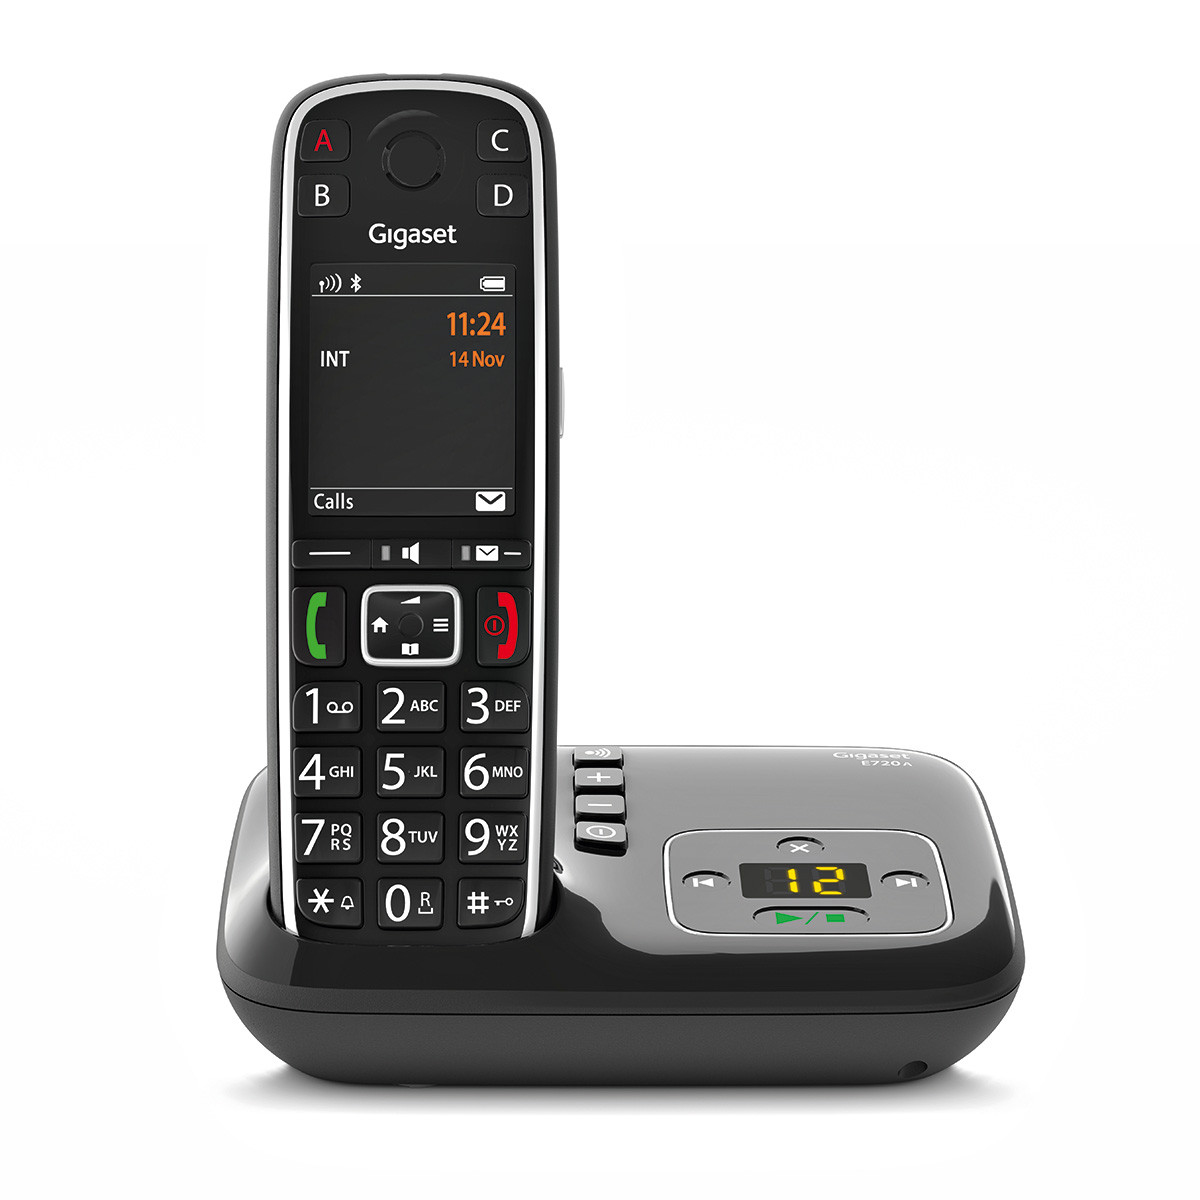 S30852-H2923-B101 UNIFY GIGASET OPENSTAGE E720A - Analog/DECT telephone - Wireless handset - 200 entries - Caller ID - Short Message Service (SMS) - Black